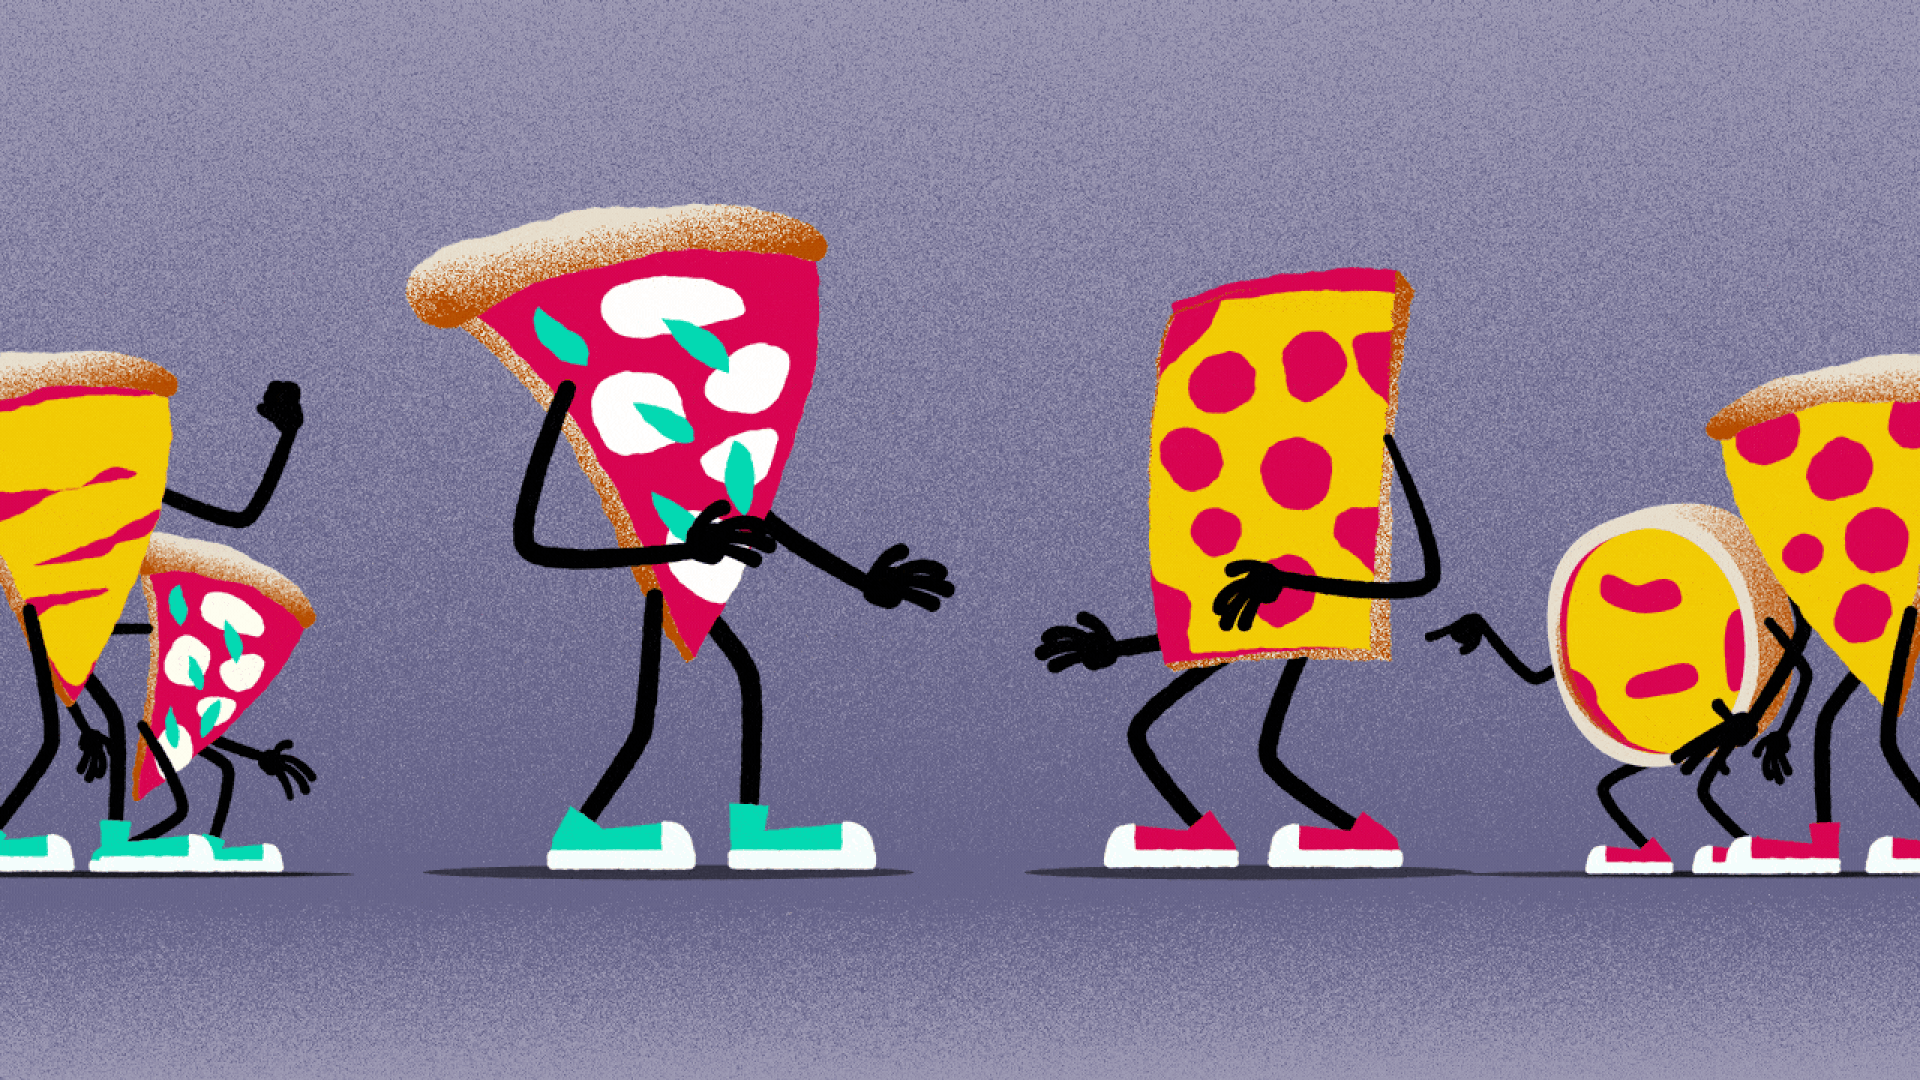 Illustration of a fistfight between two slices of pizza, with other types of pizza looking on.